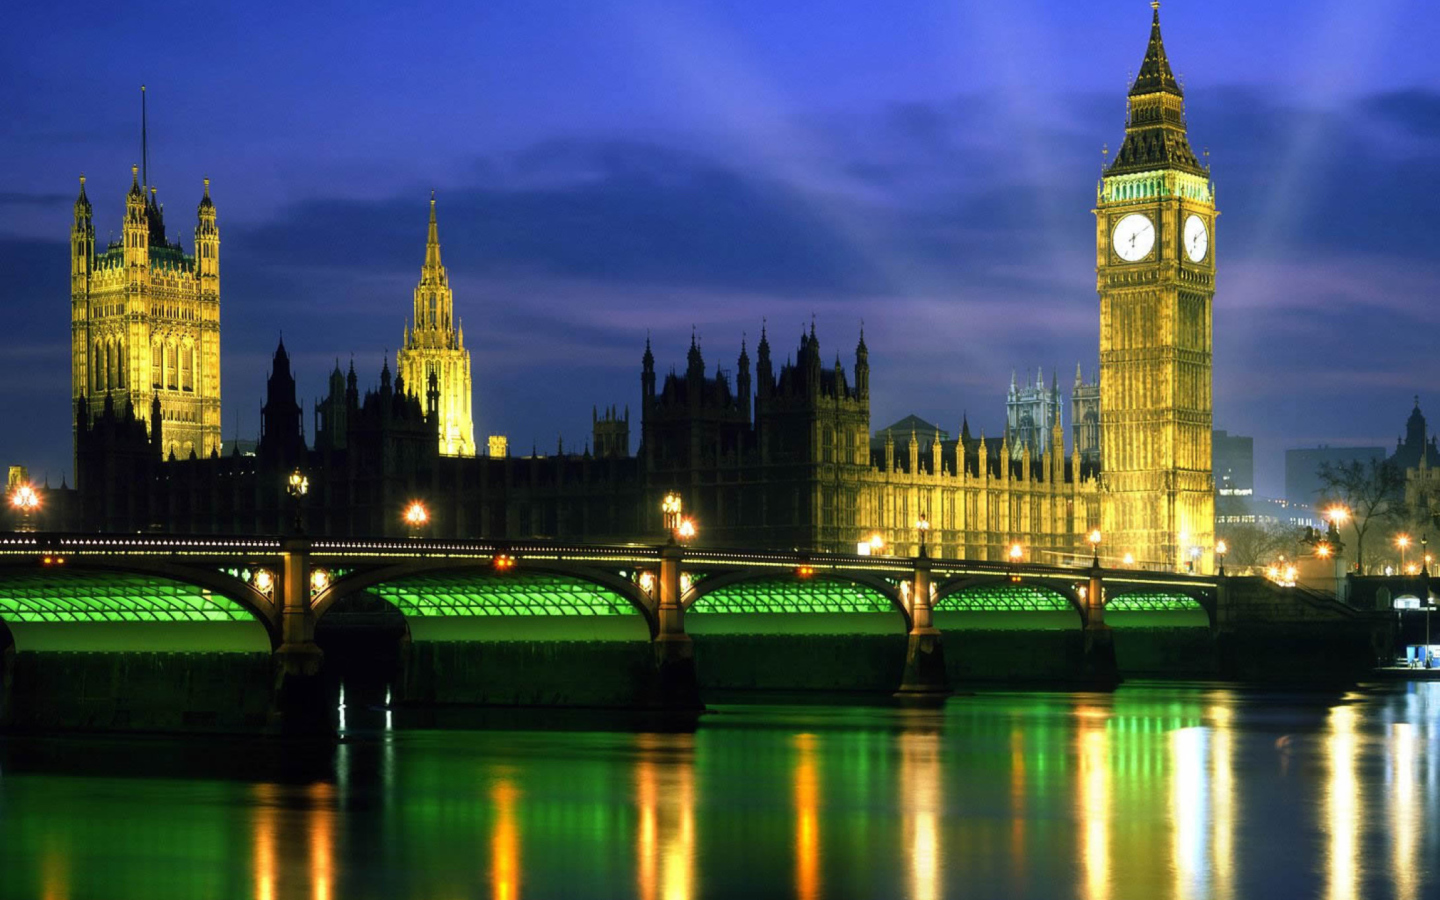 Palace Of Westminster At Night wallpaper 1440x900